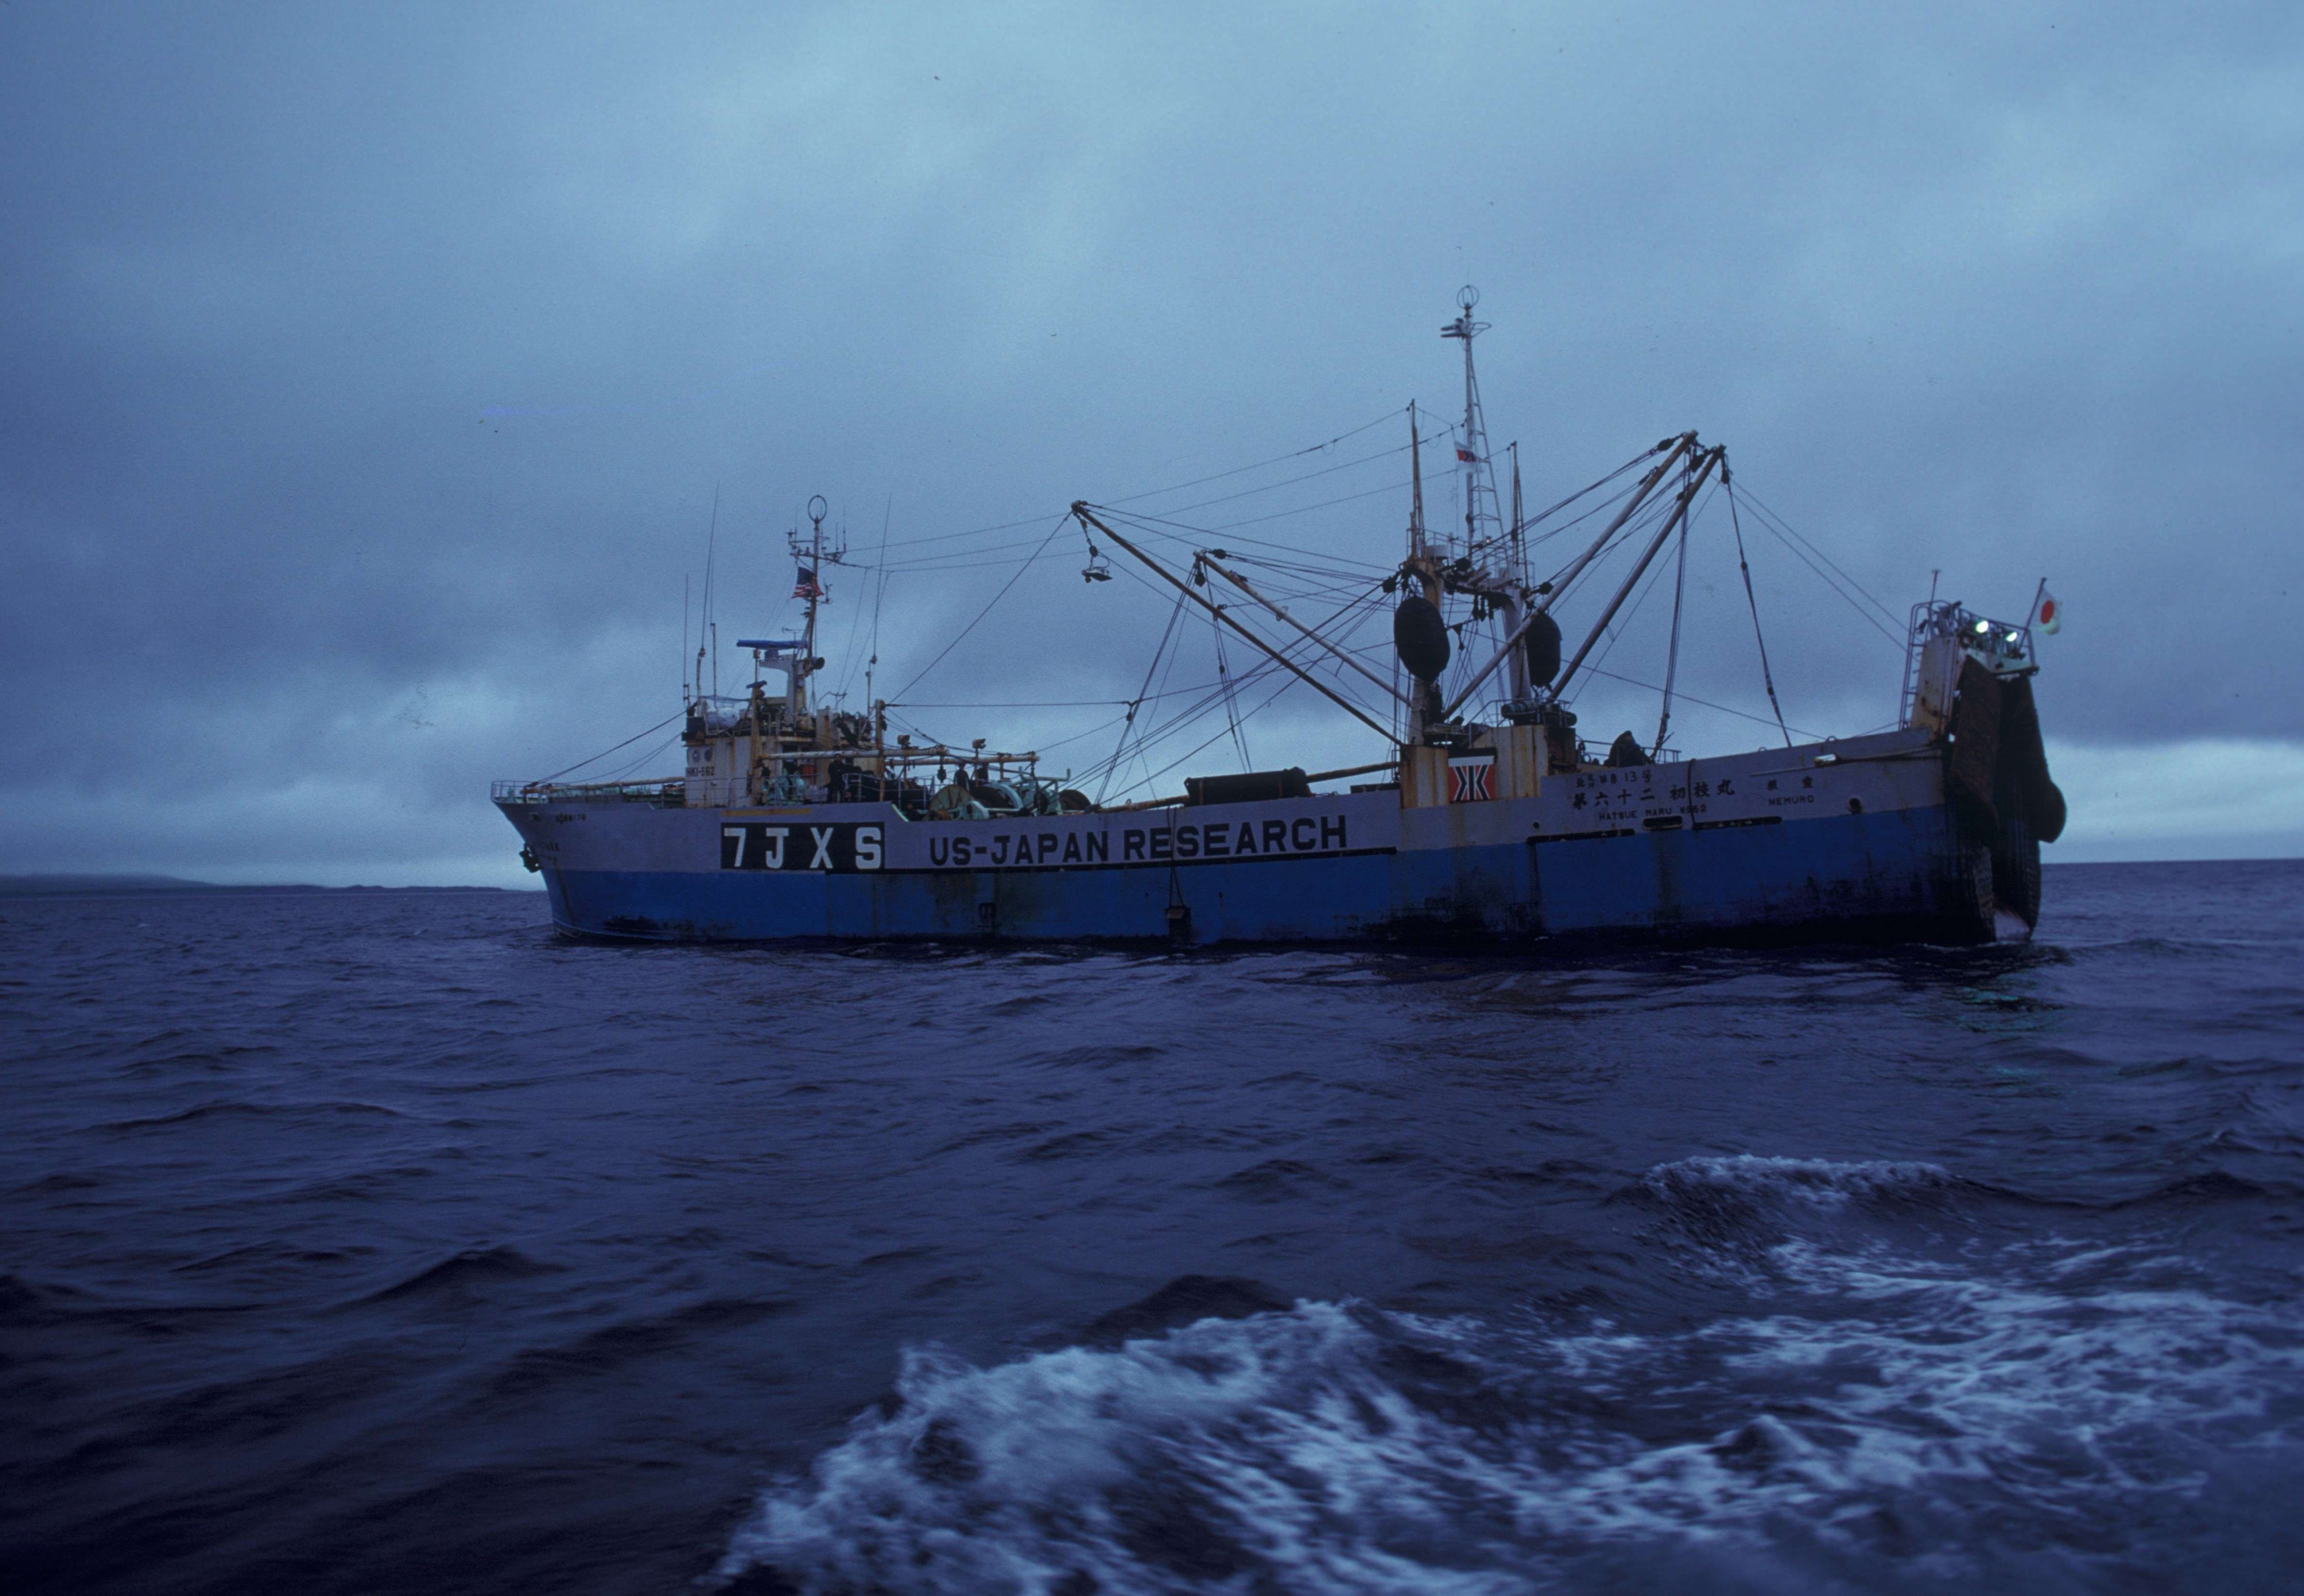 Japanese fisheries research vessel HATSUE MARU used in cooperative1980 study of groundfish in the eastern Bering Sea.